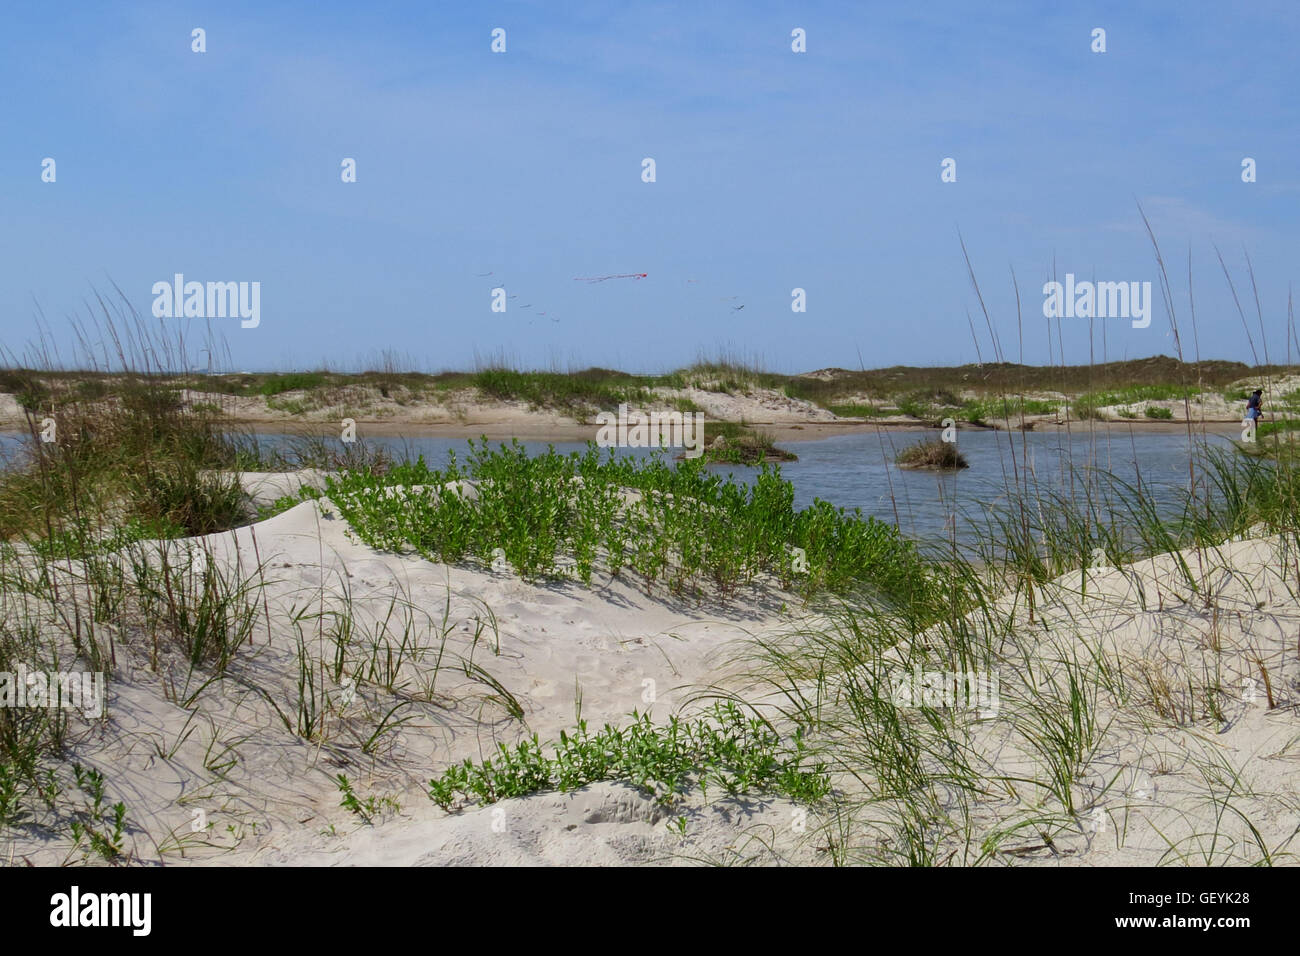 Sand dunes, grass , tide-pool with kites in the background Stock Photo